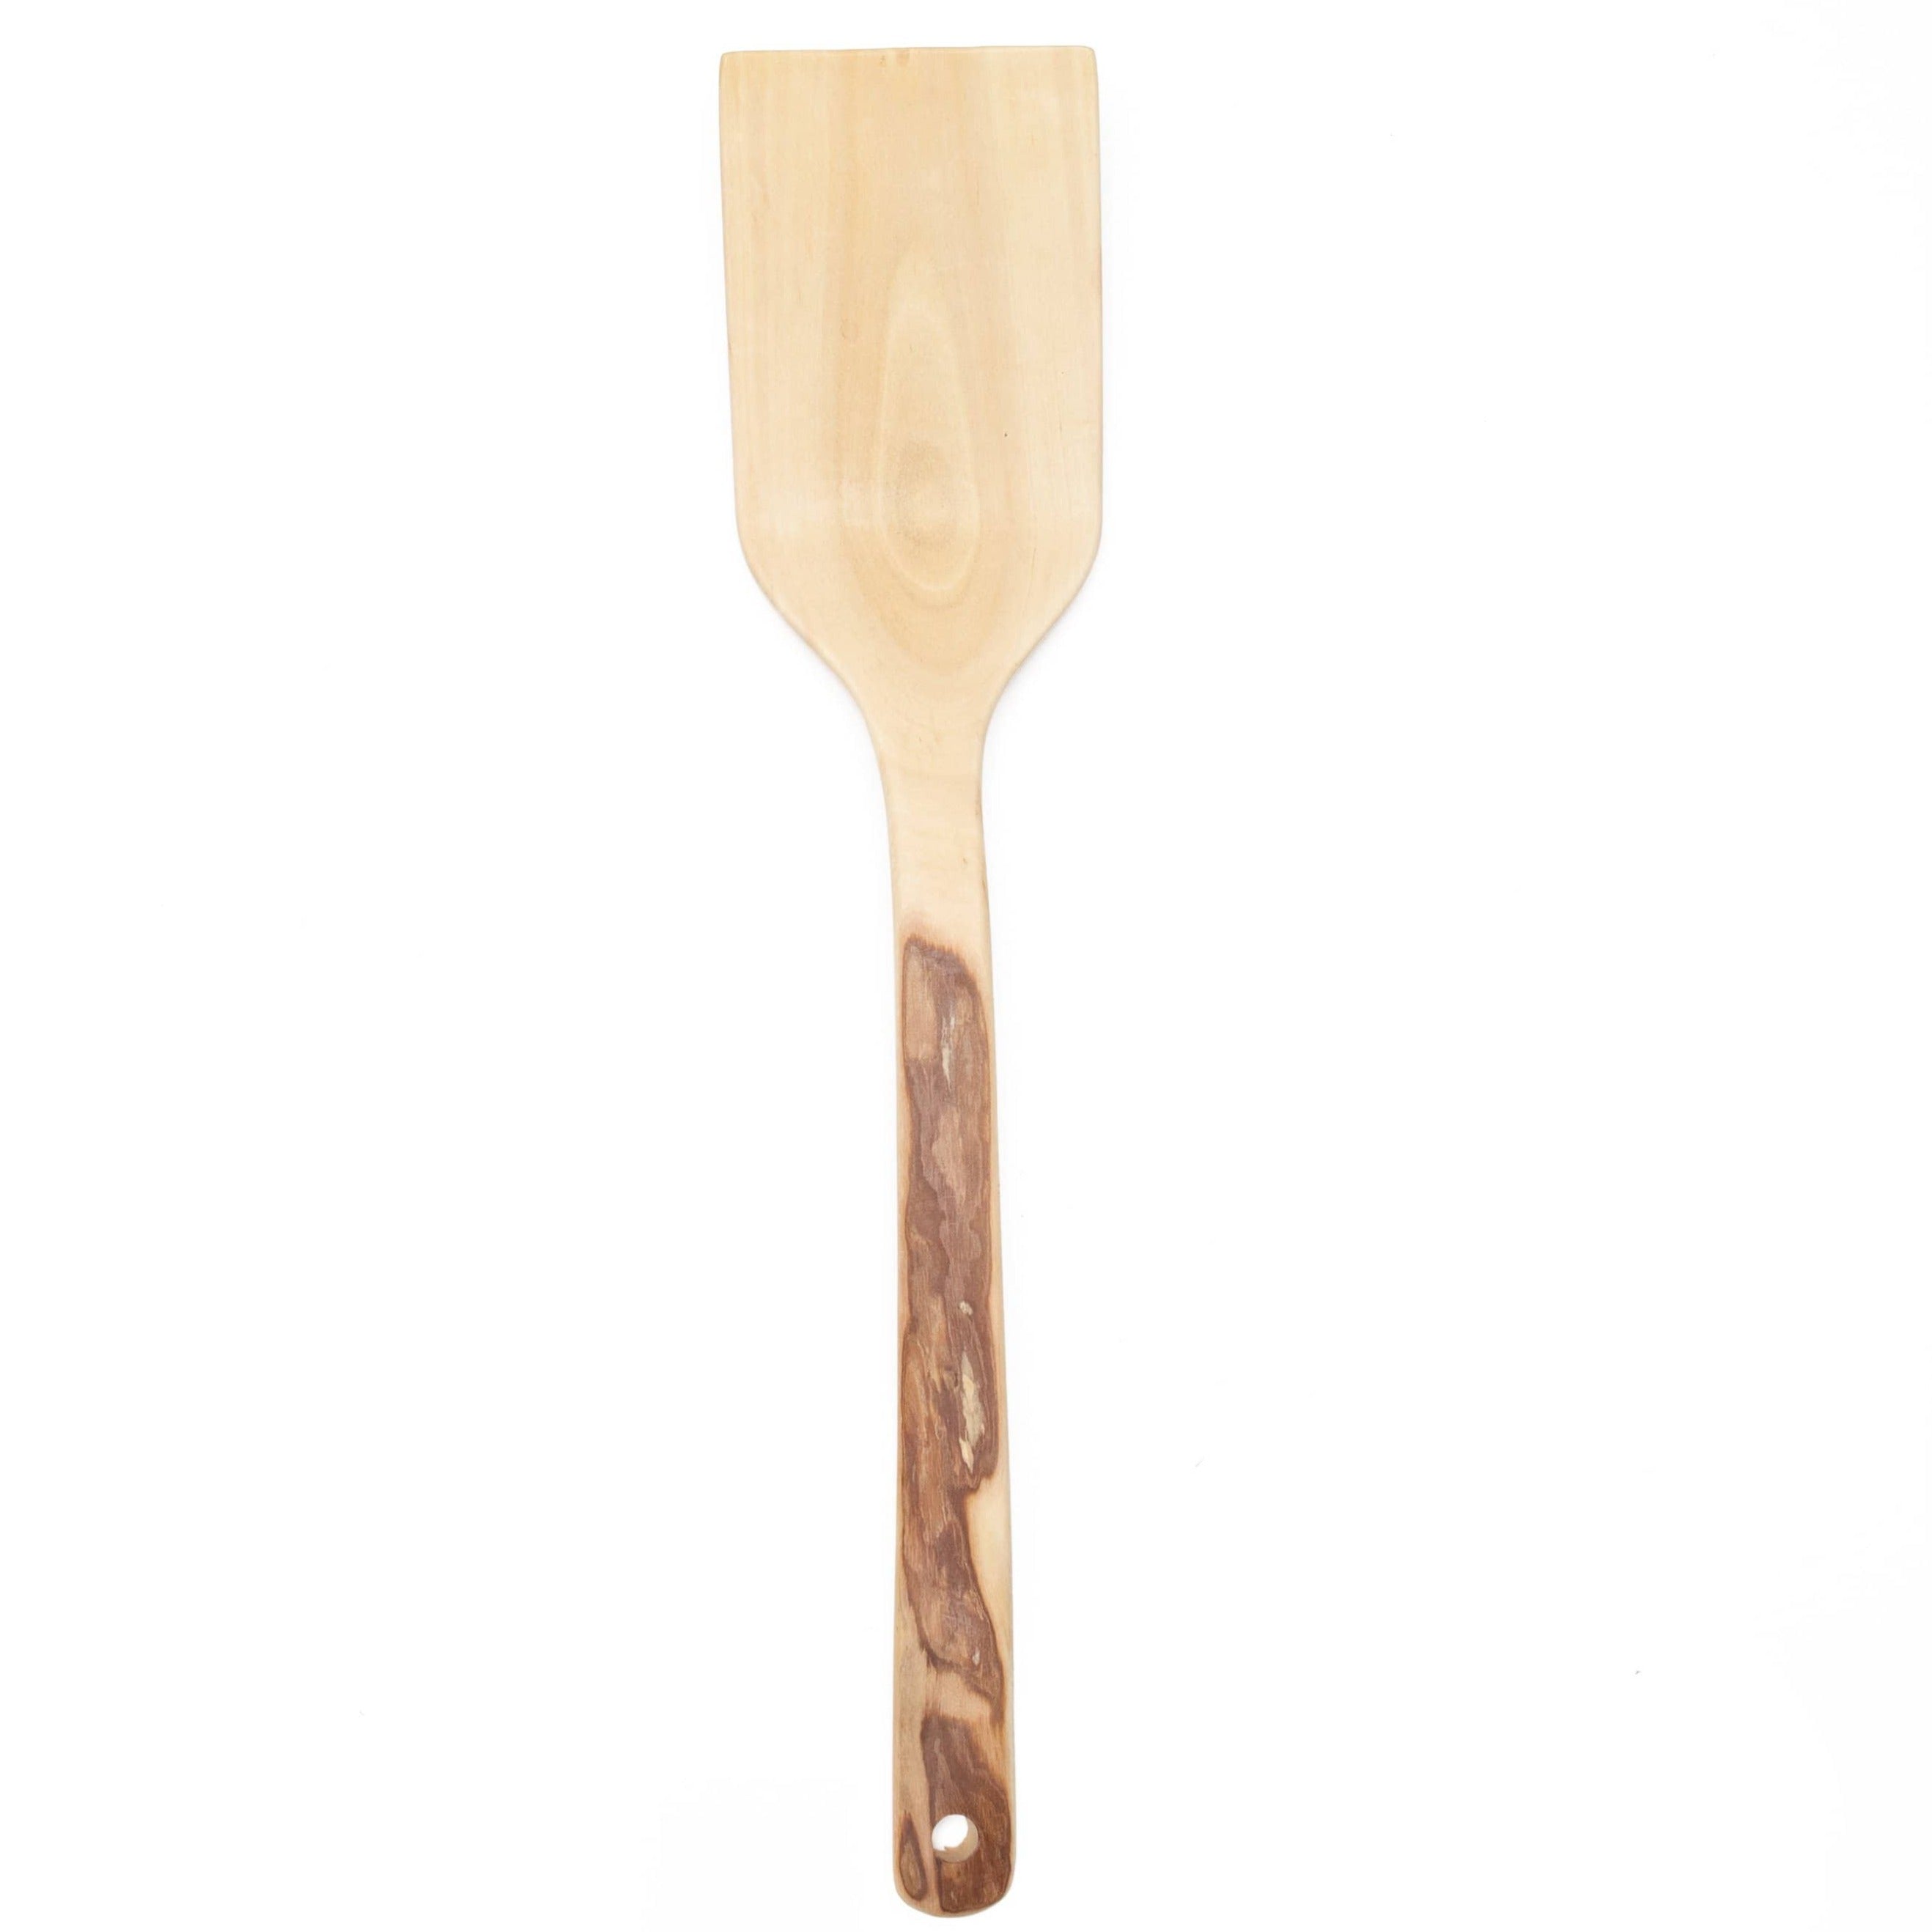 Hand-carved wood spatula: sustainable macawood, laurelwood, or coffeewood. Fair trade, artisan-crafted, unique gift. Flip with style & eco-love! ✨